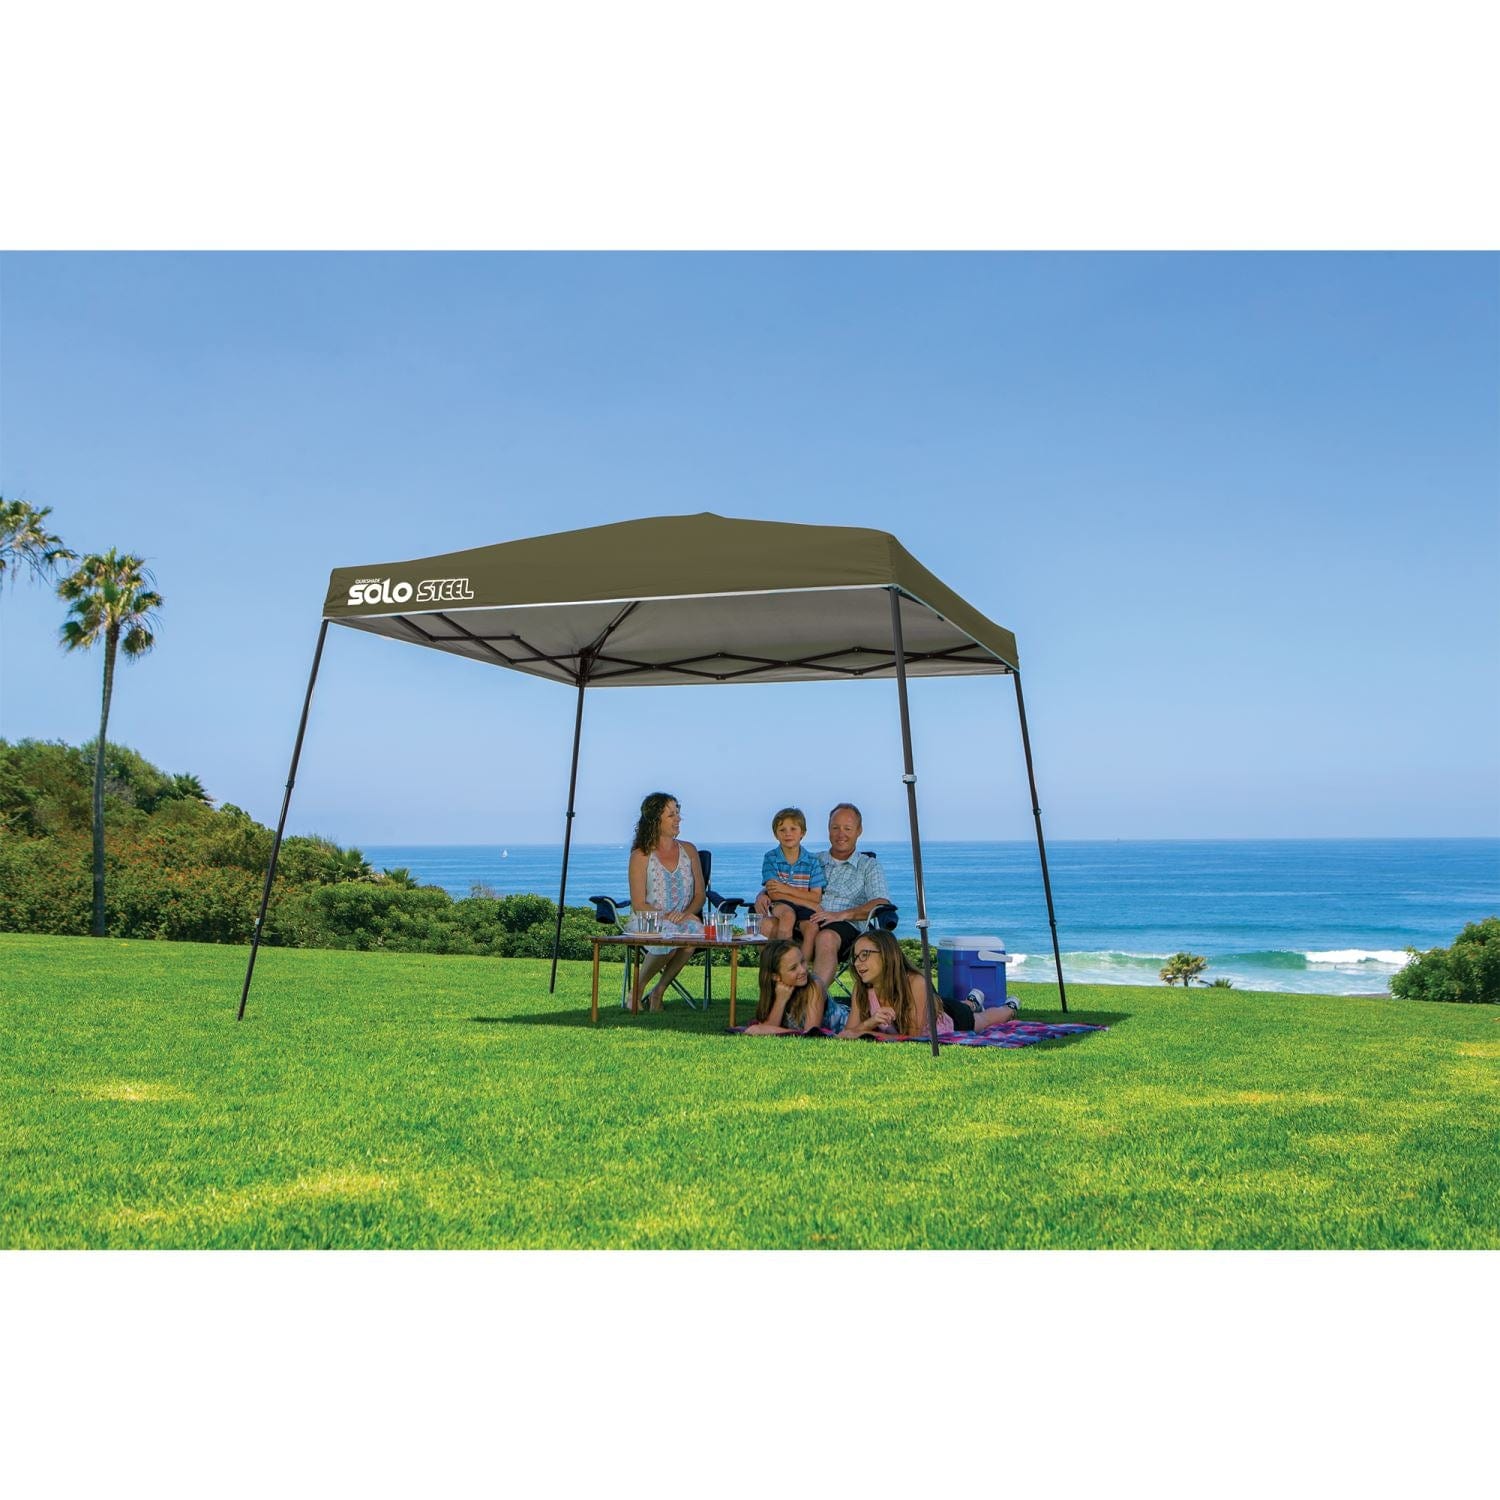 Quik Shade Pop Up Canopies Quik Shade | Solo Steel 72 11' x 11' Slant Leg Canopy - Olive 167547DS